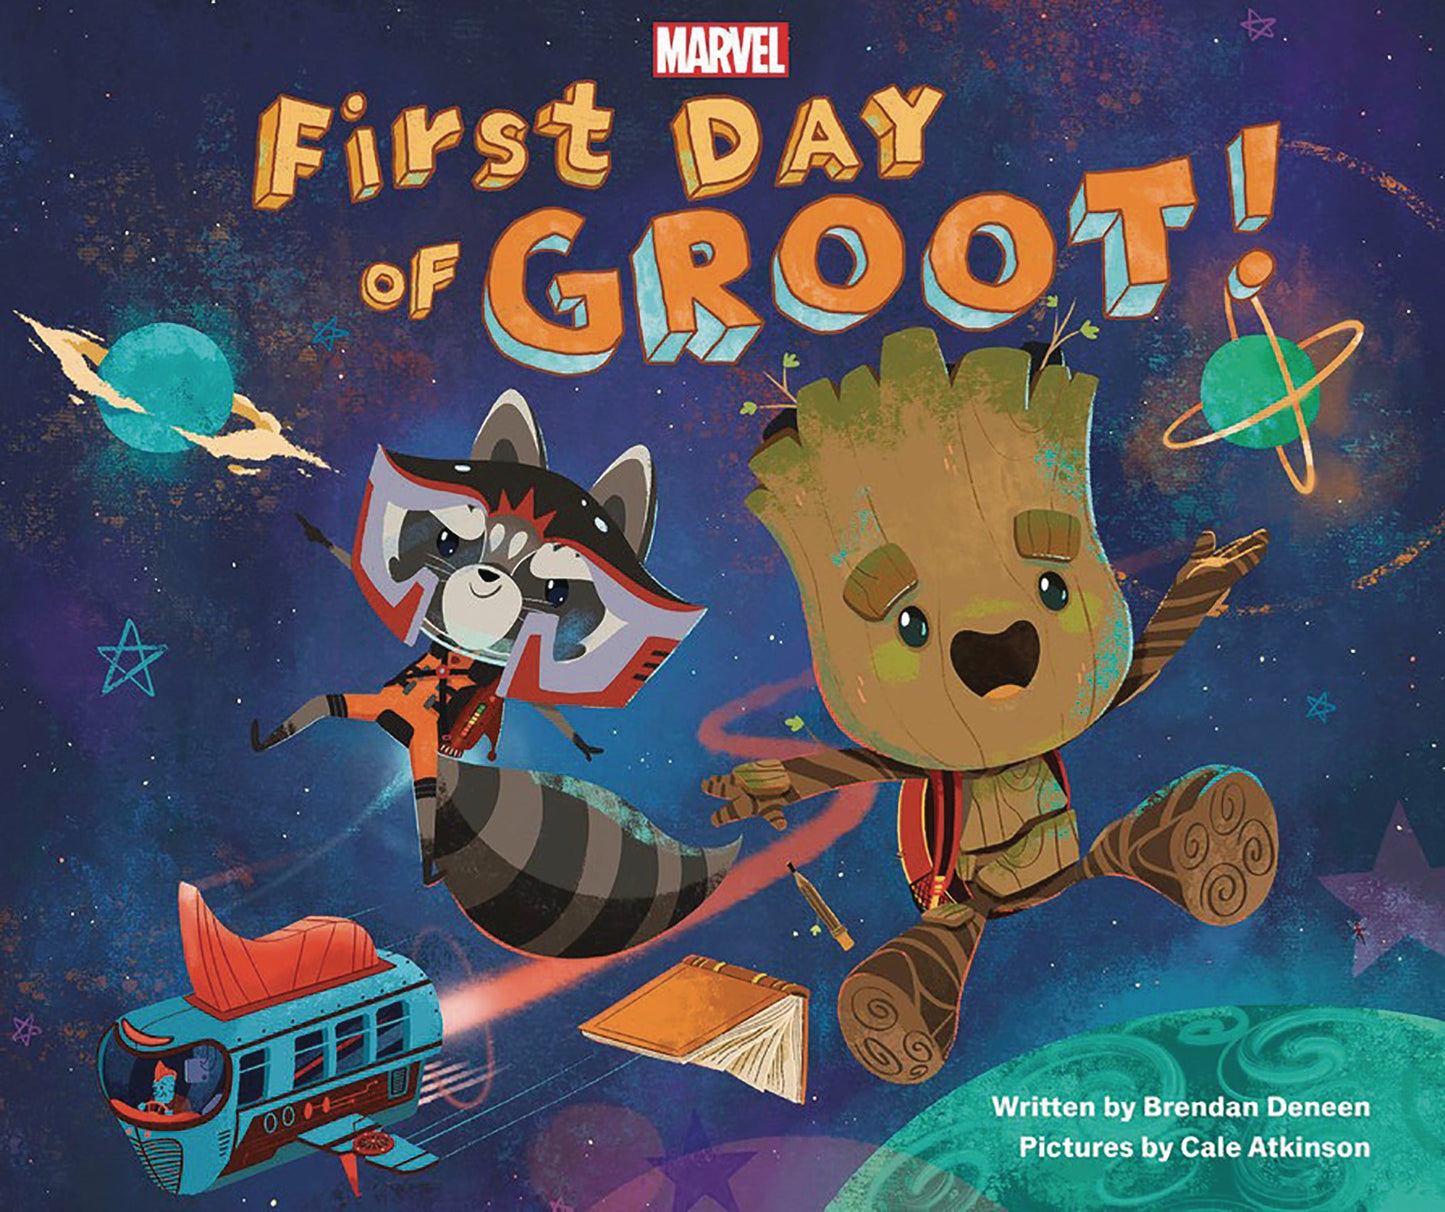 FIRST DAY OF GROOT YR PICTURE BOOK